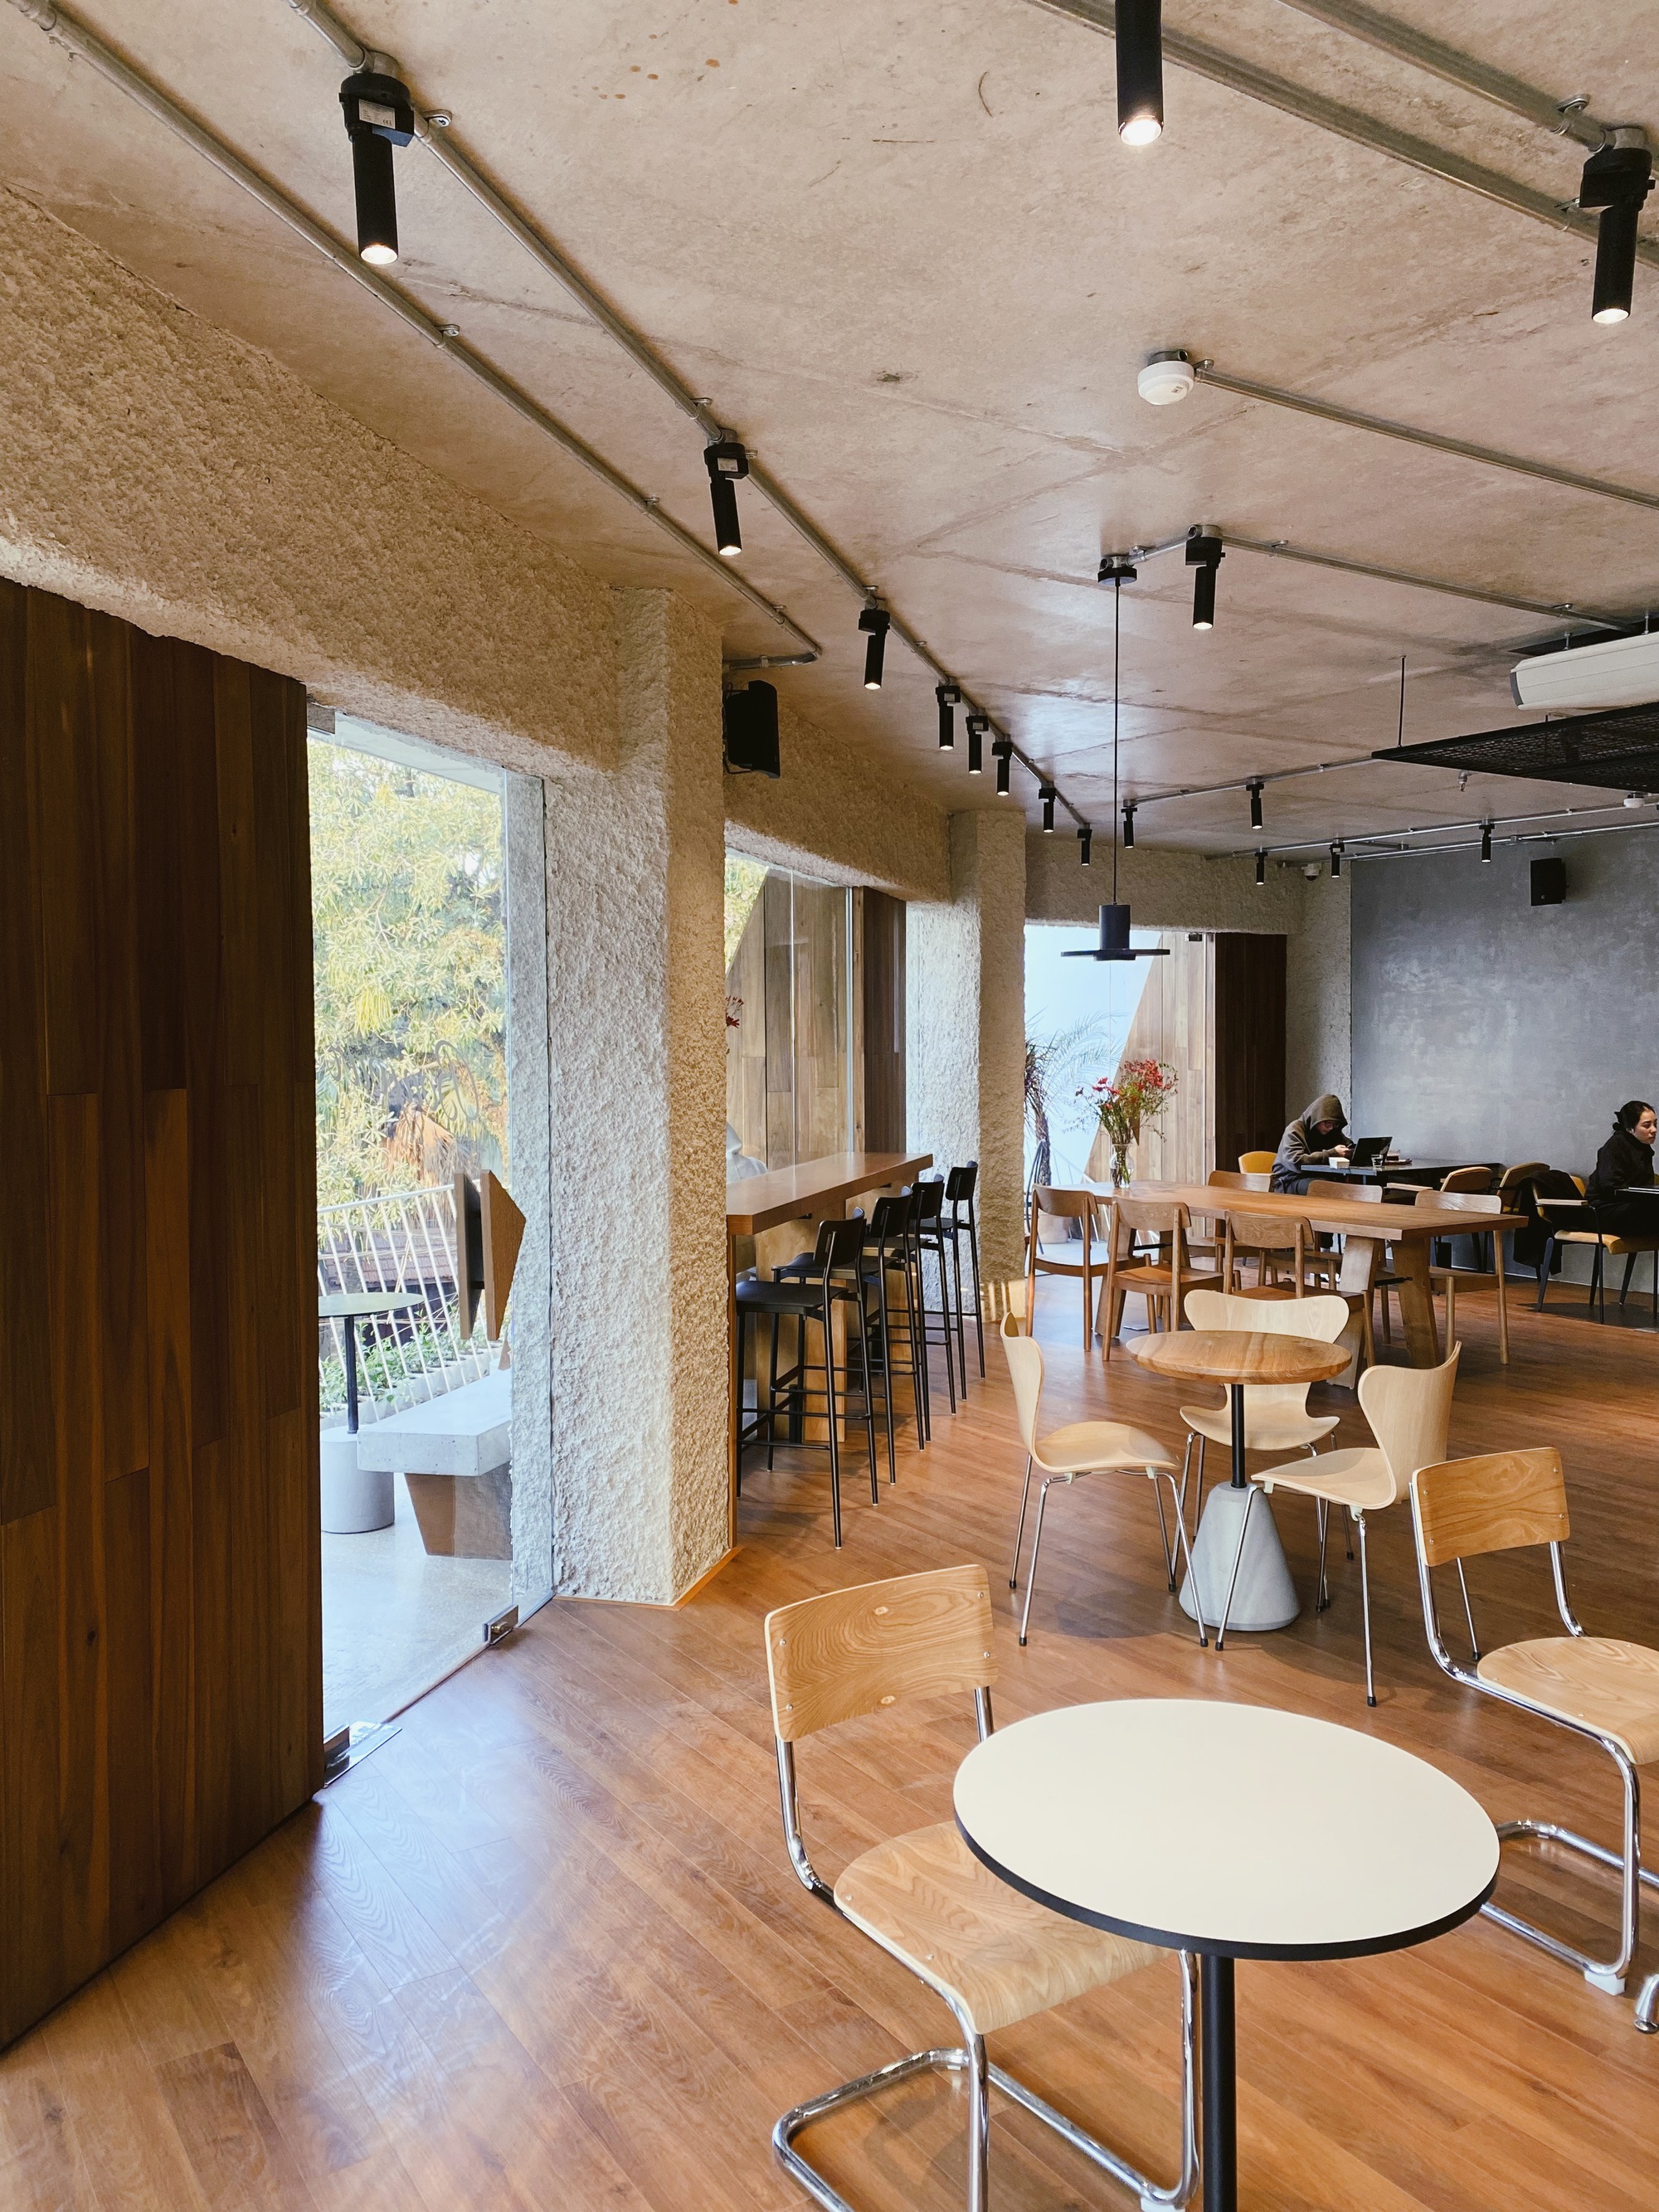 A series of brand new cafes in Hanoi for young people to live virtual this Christmas - Photo 5.